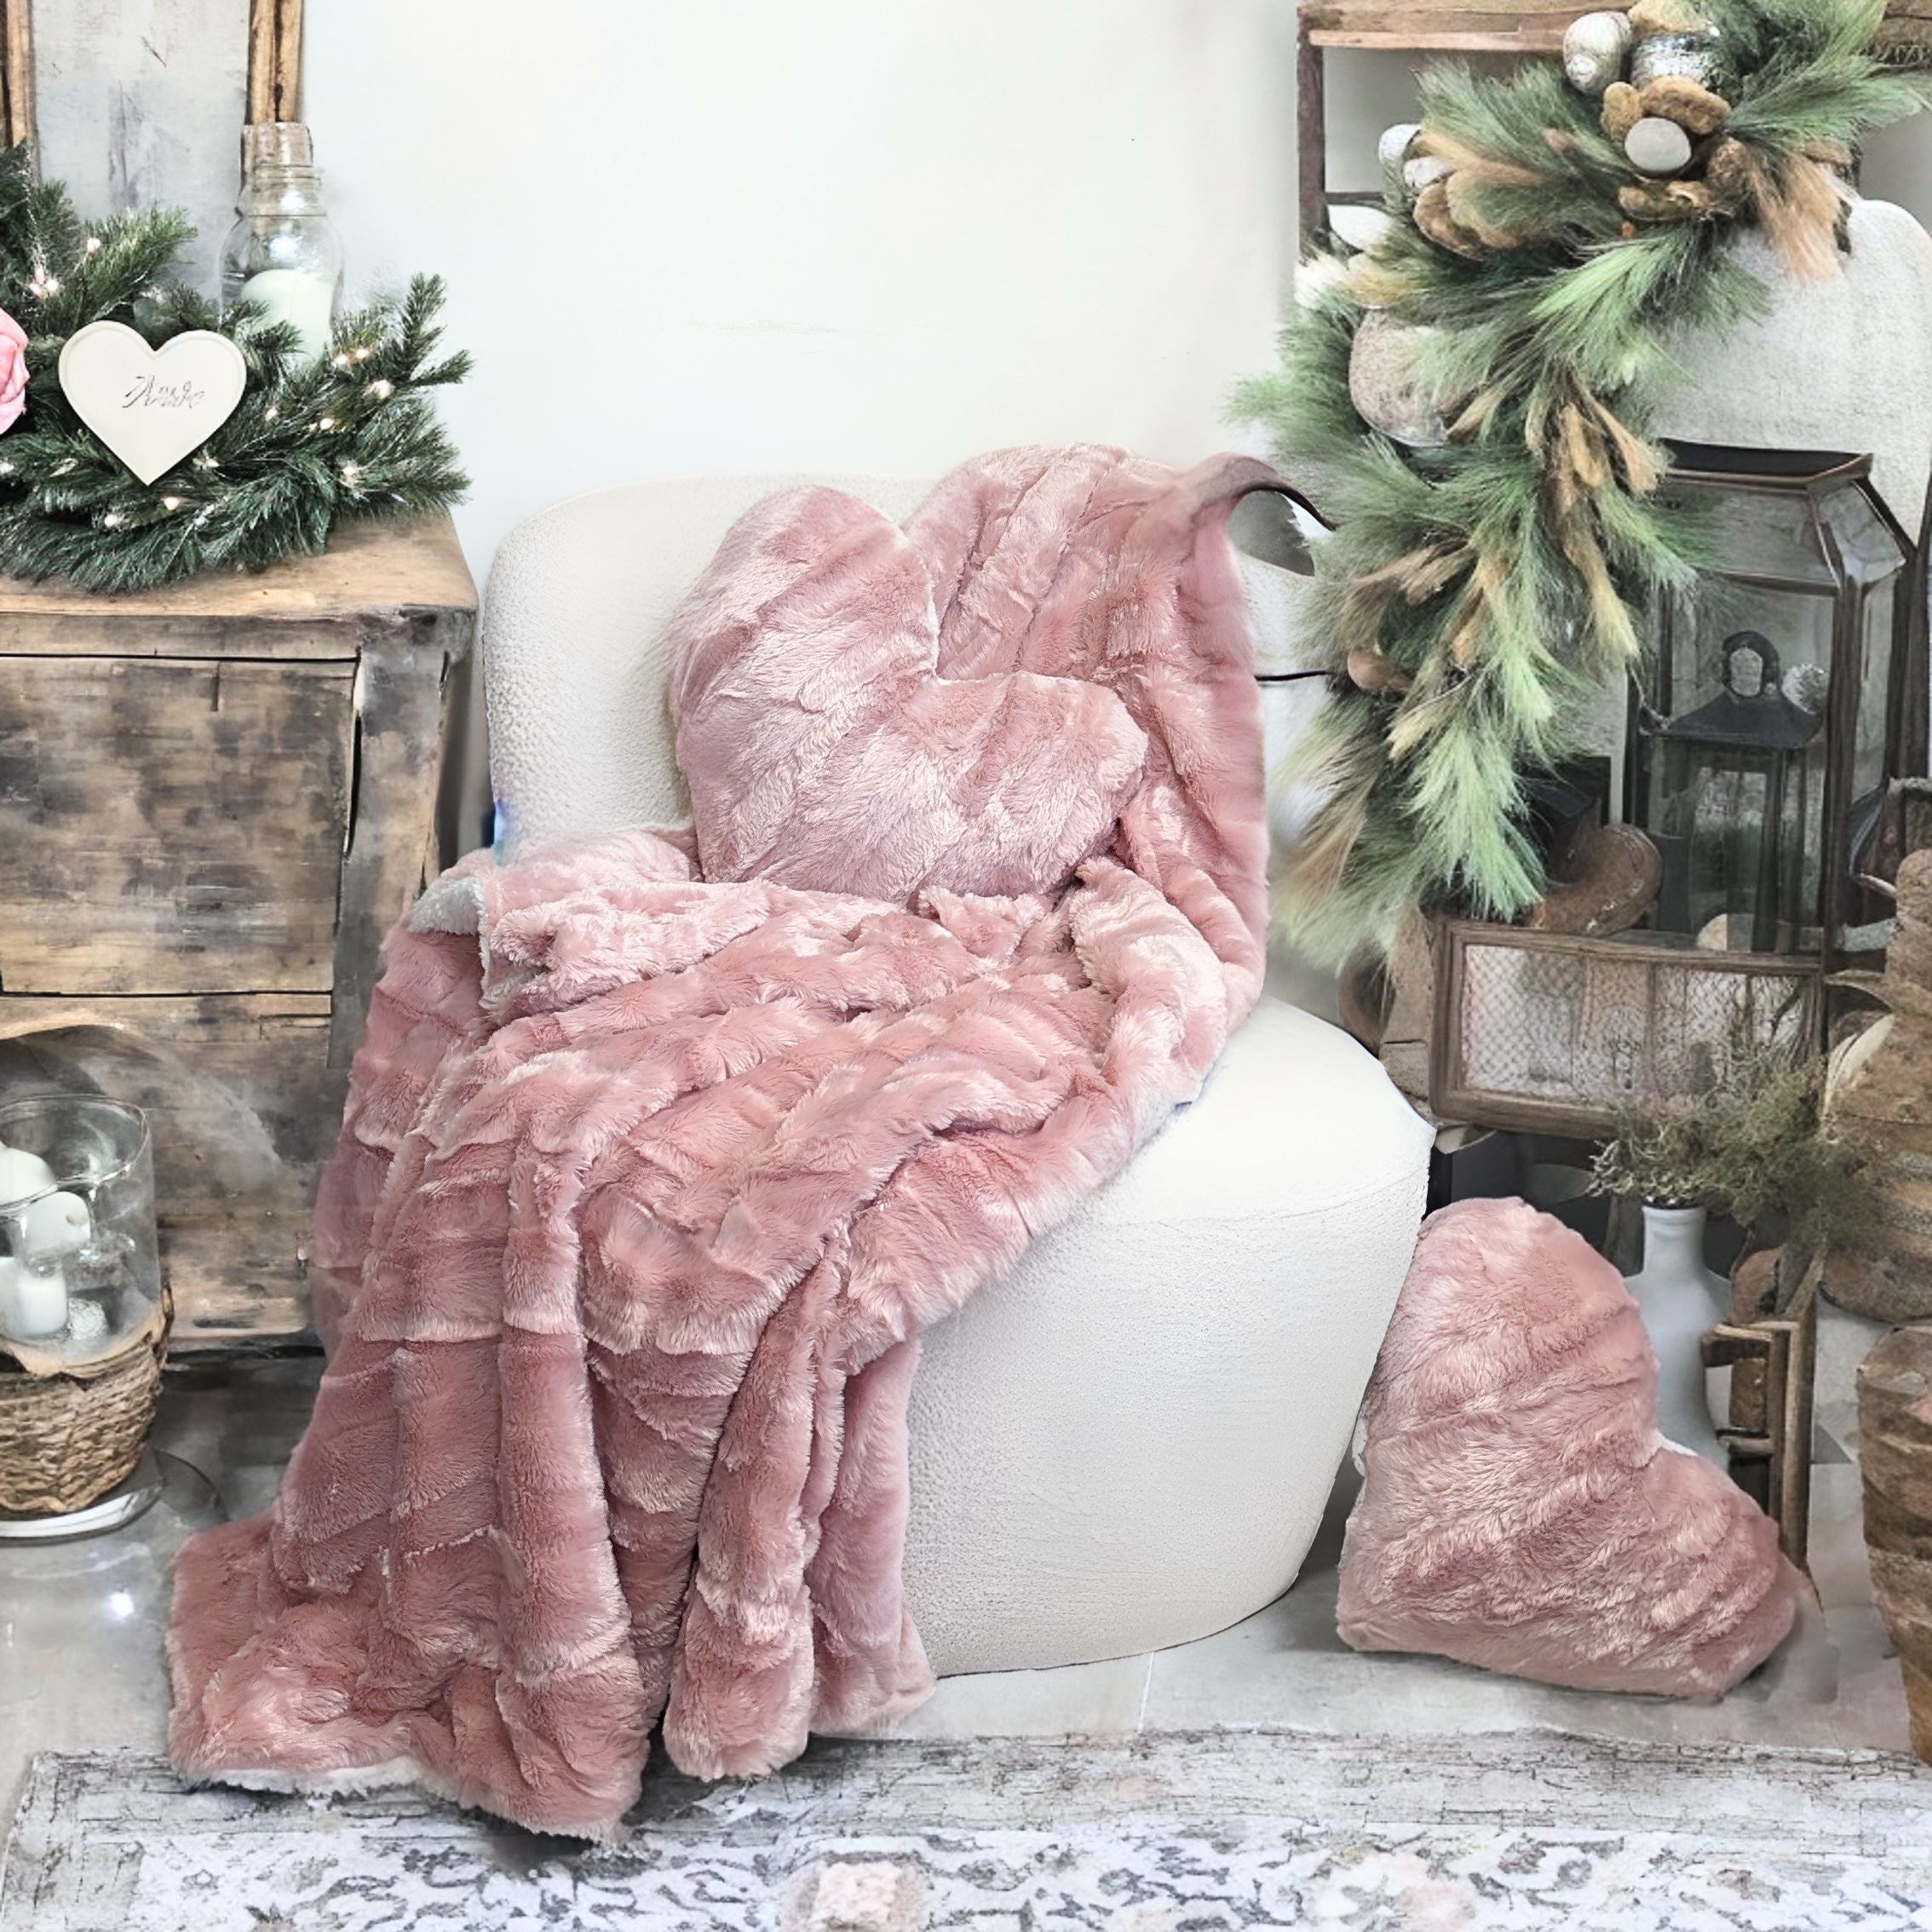 A cozy pink plush blanket and a heart-shaped pillow rest on a white armchair.  The image is a close-up of the chair and blanket. The blanket is a pale pink color and looks very soft and fluffy. It is folded over the back of the chair and drapes down over the seat. The heart-shaped pillow is also pink and sits on top of the blanket. The chair is white and has a simple, modern design.